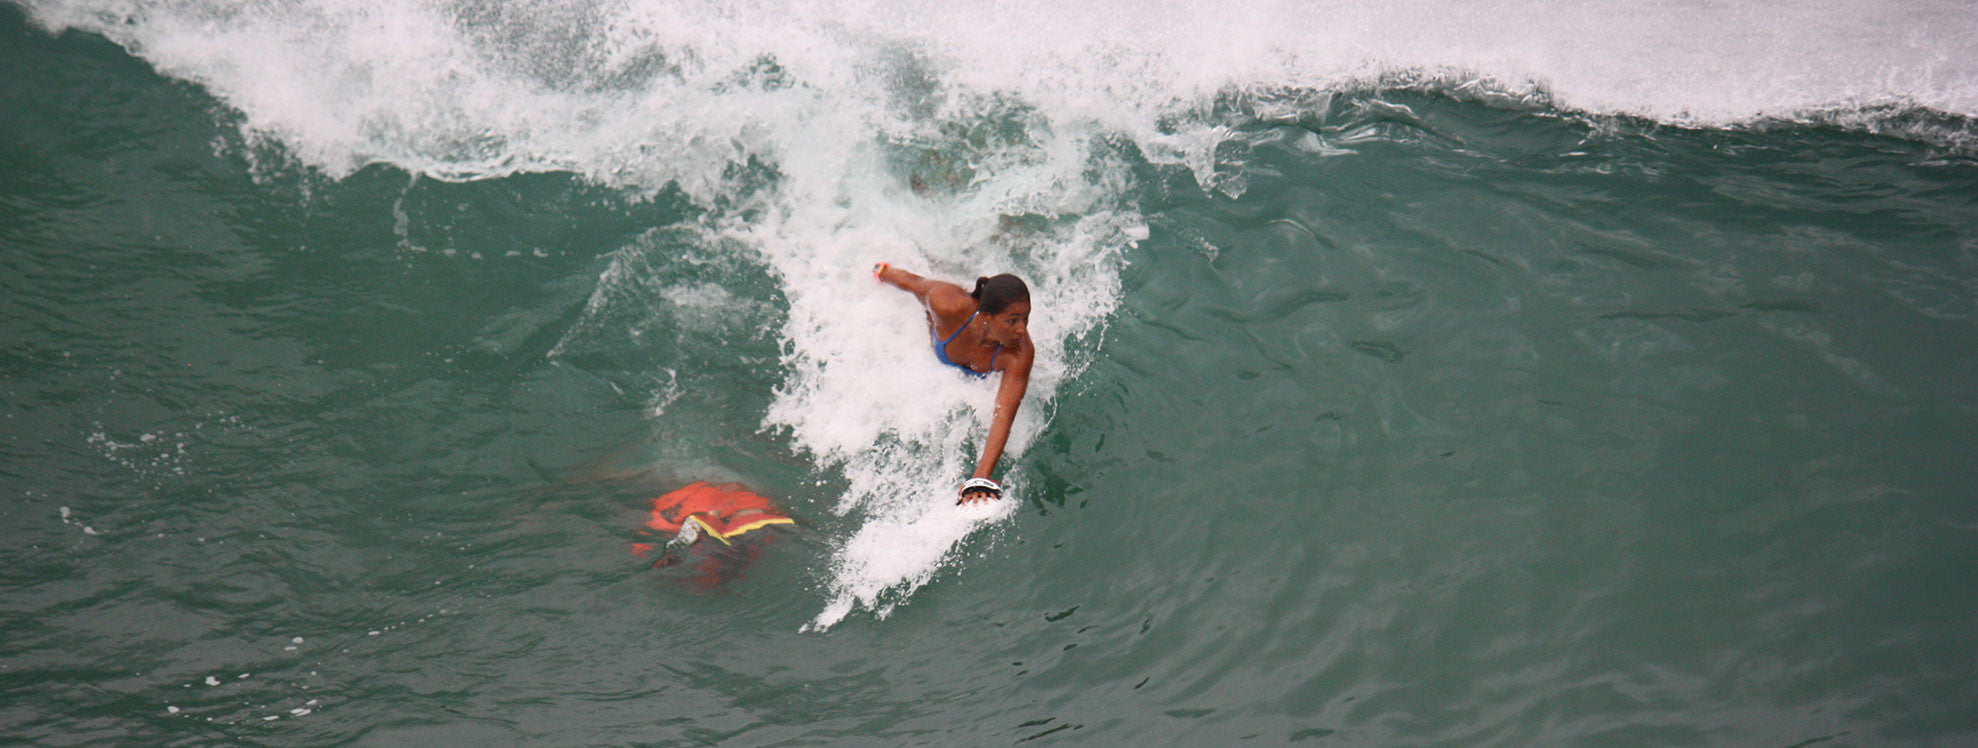 Surfers (@surfers) • Instagram photos and videos